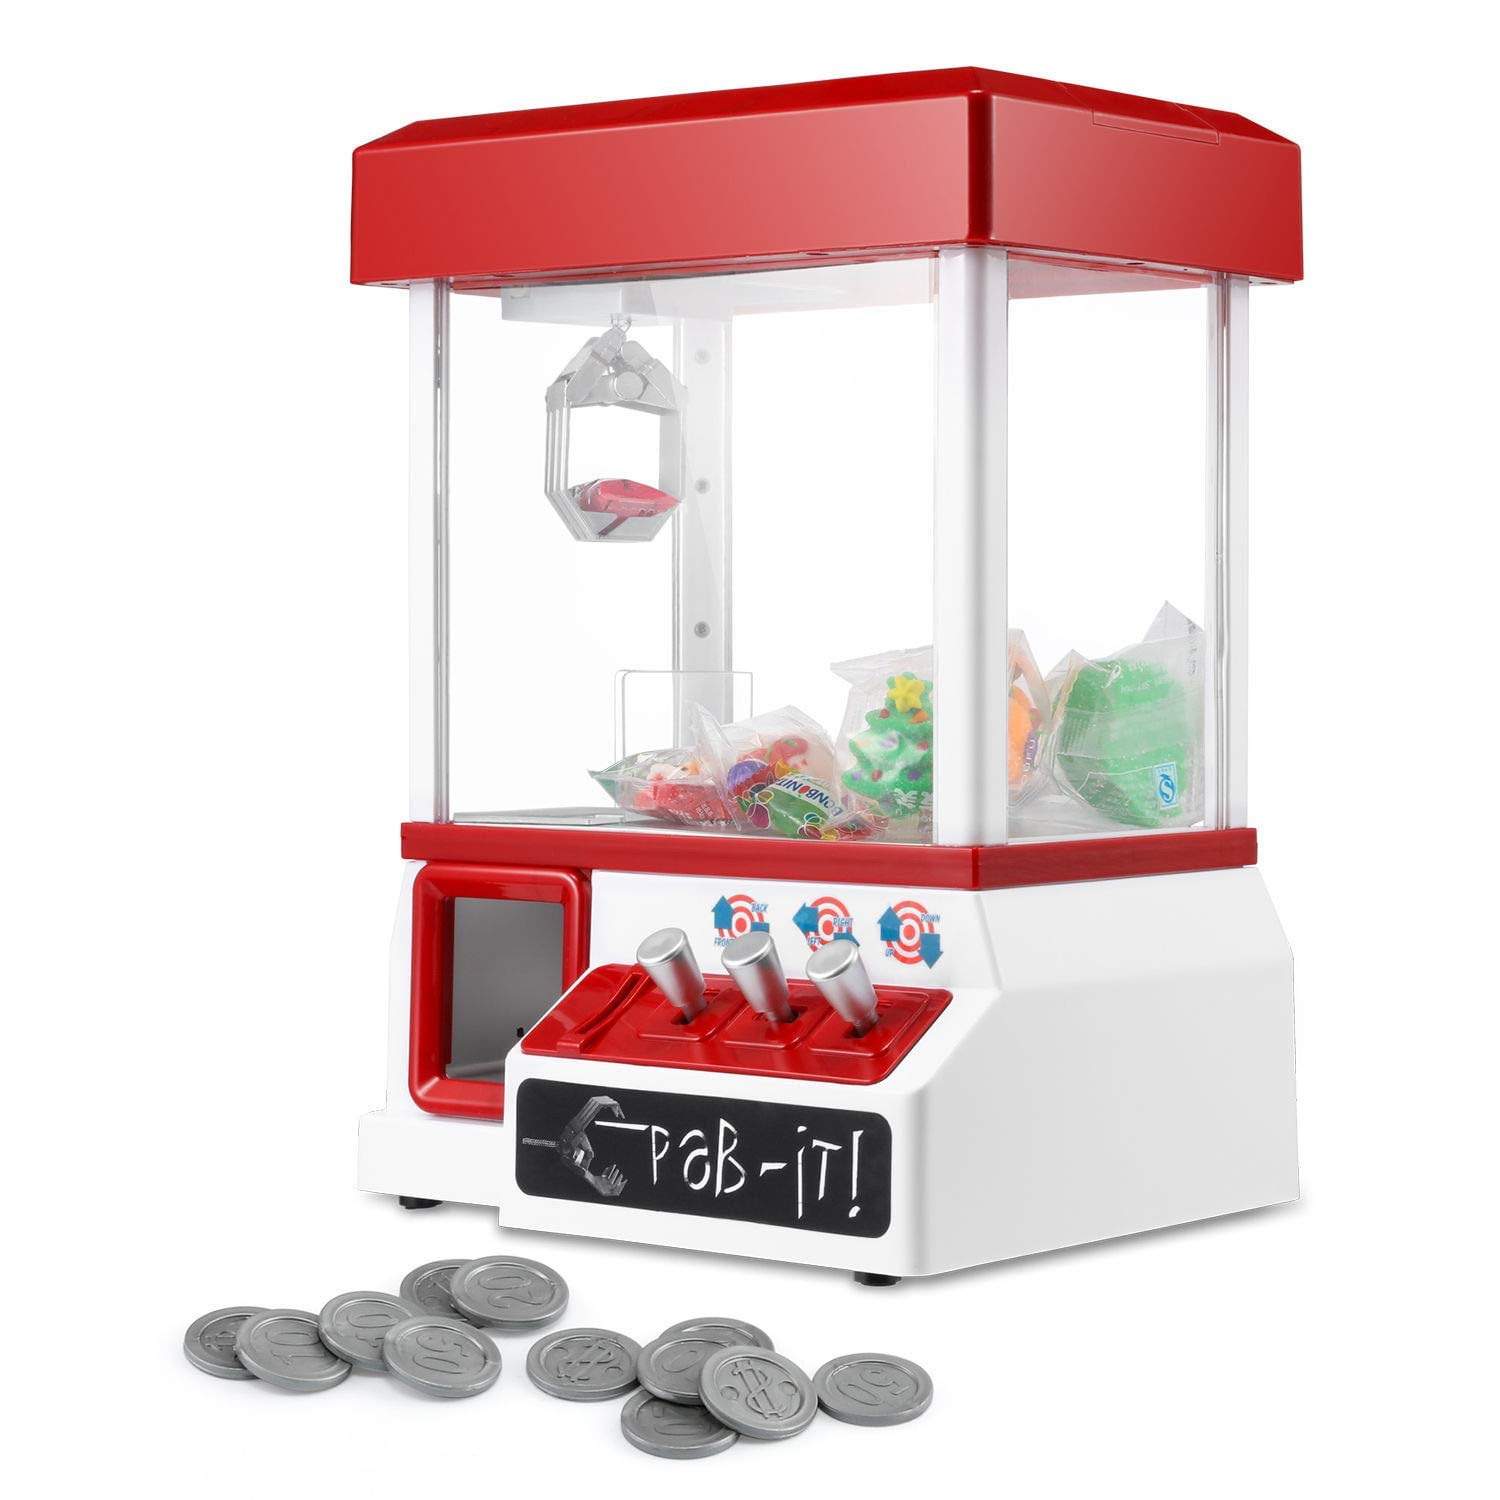 Carnival Crane Claw Game - Features Animation and Sounds for Exciting  Pretend Play Home Carnival Claw Game Kids Arcade Electronic Toy Grabber  Crane Machine Features and Exciting with Sound - Walmart.com